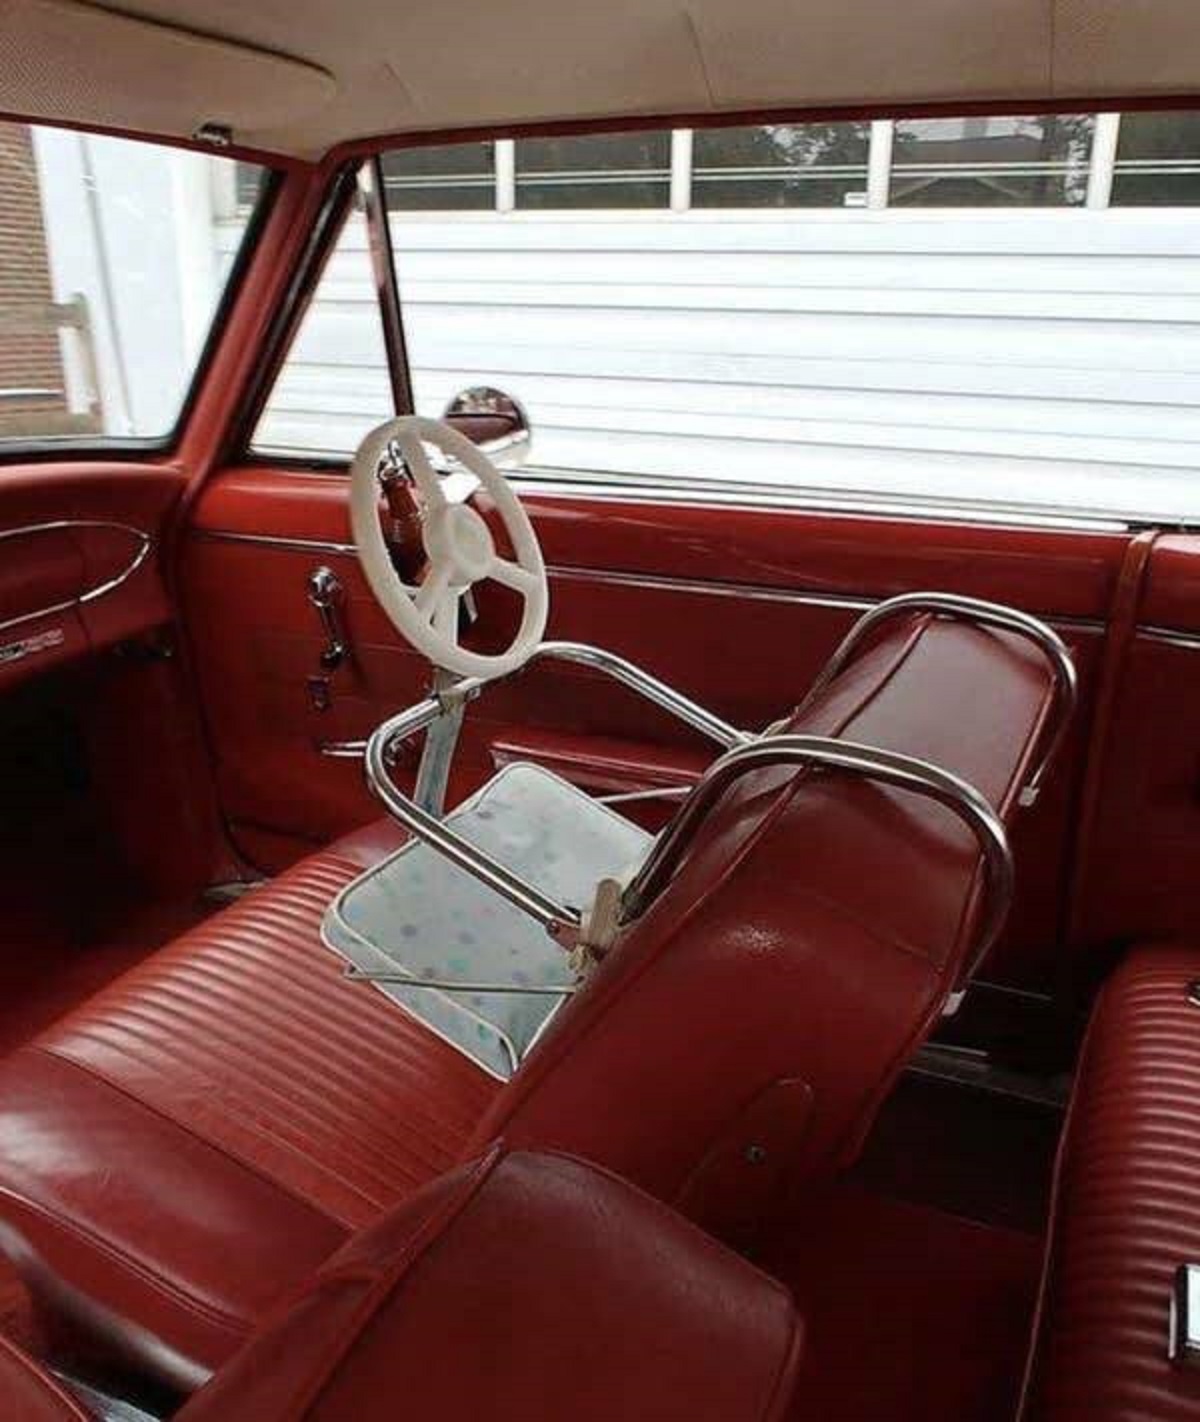 This is what a children's car seat from the 1950s looked like.